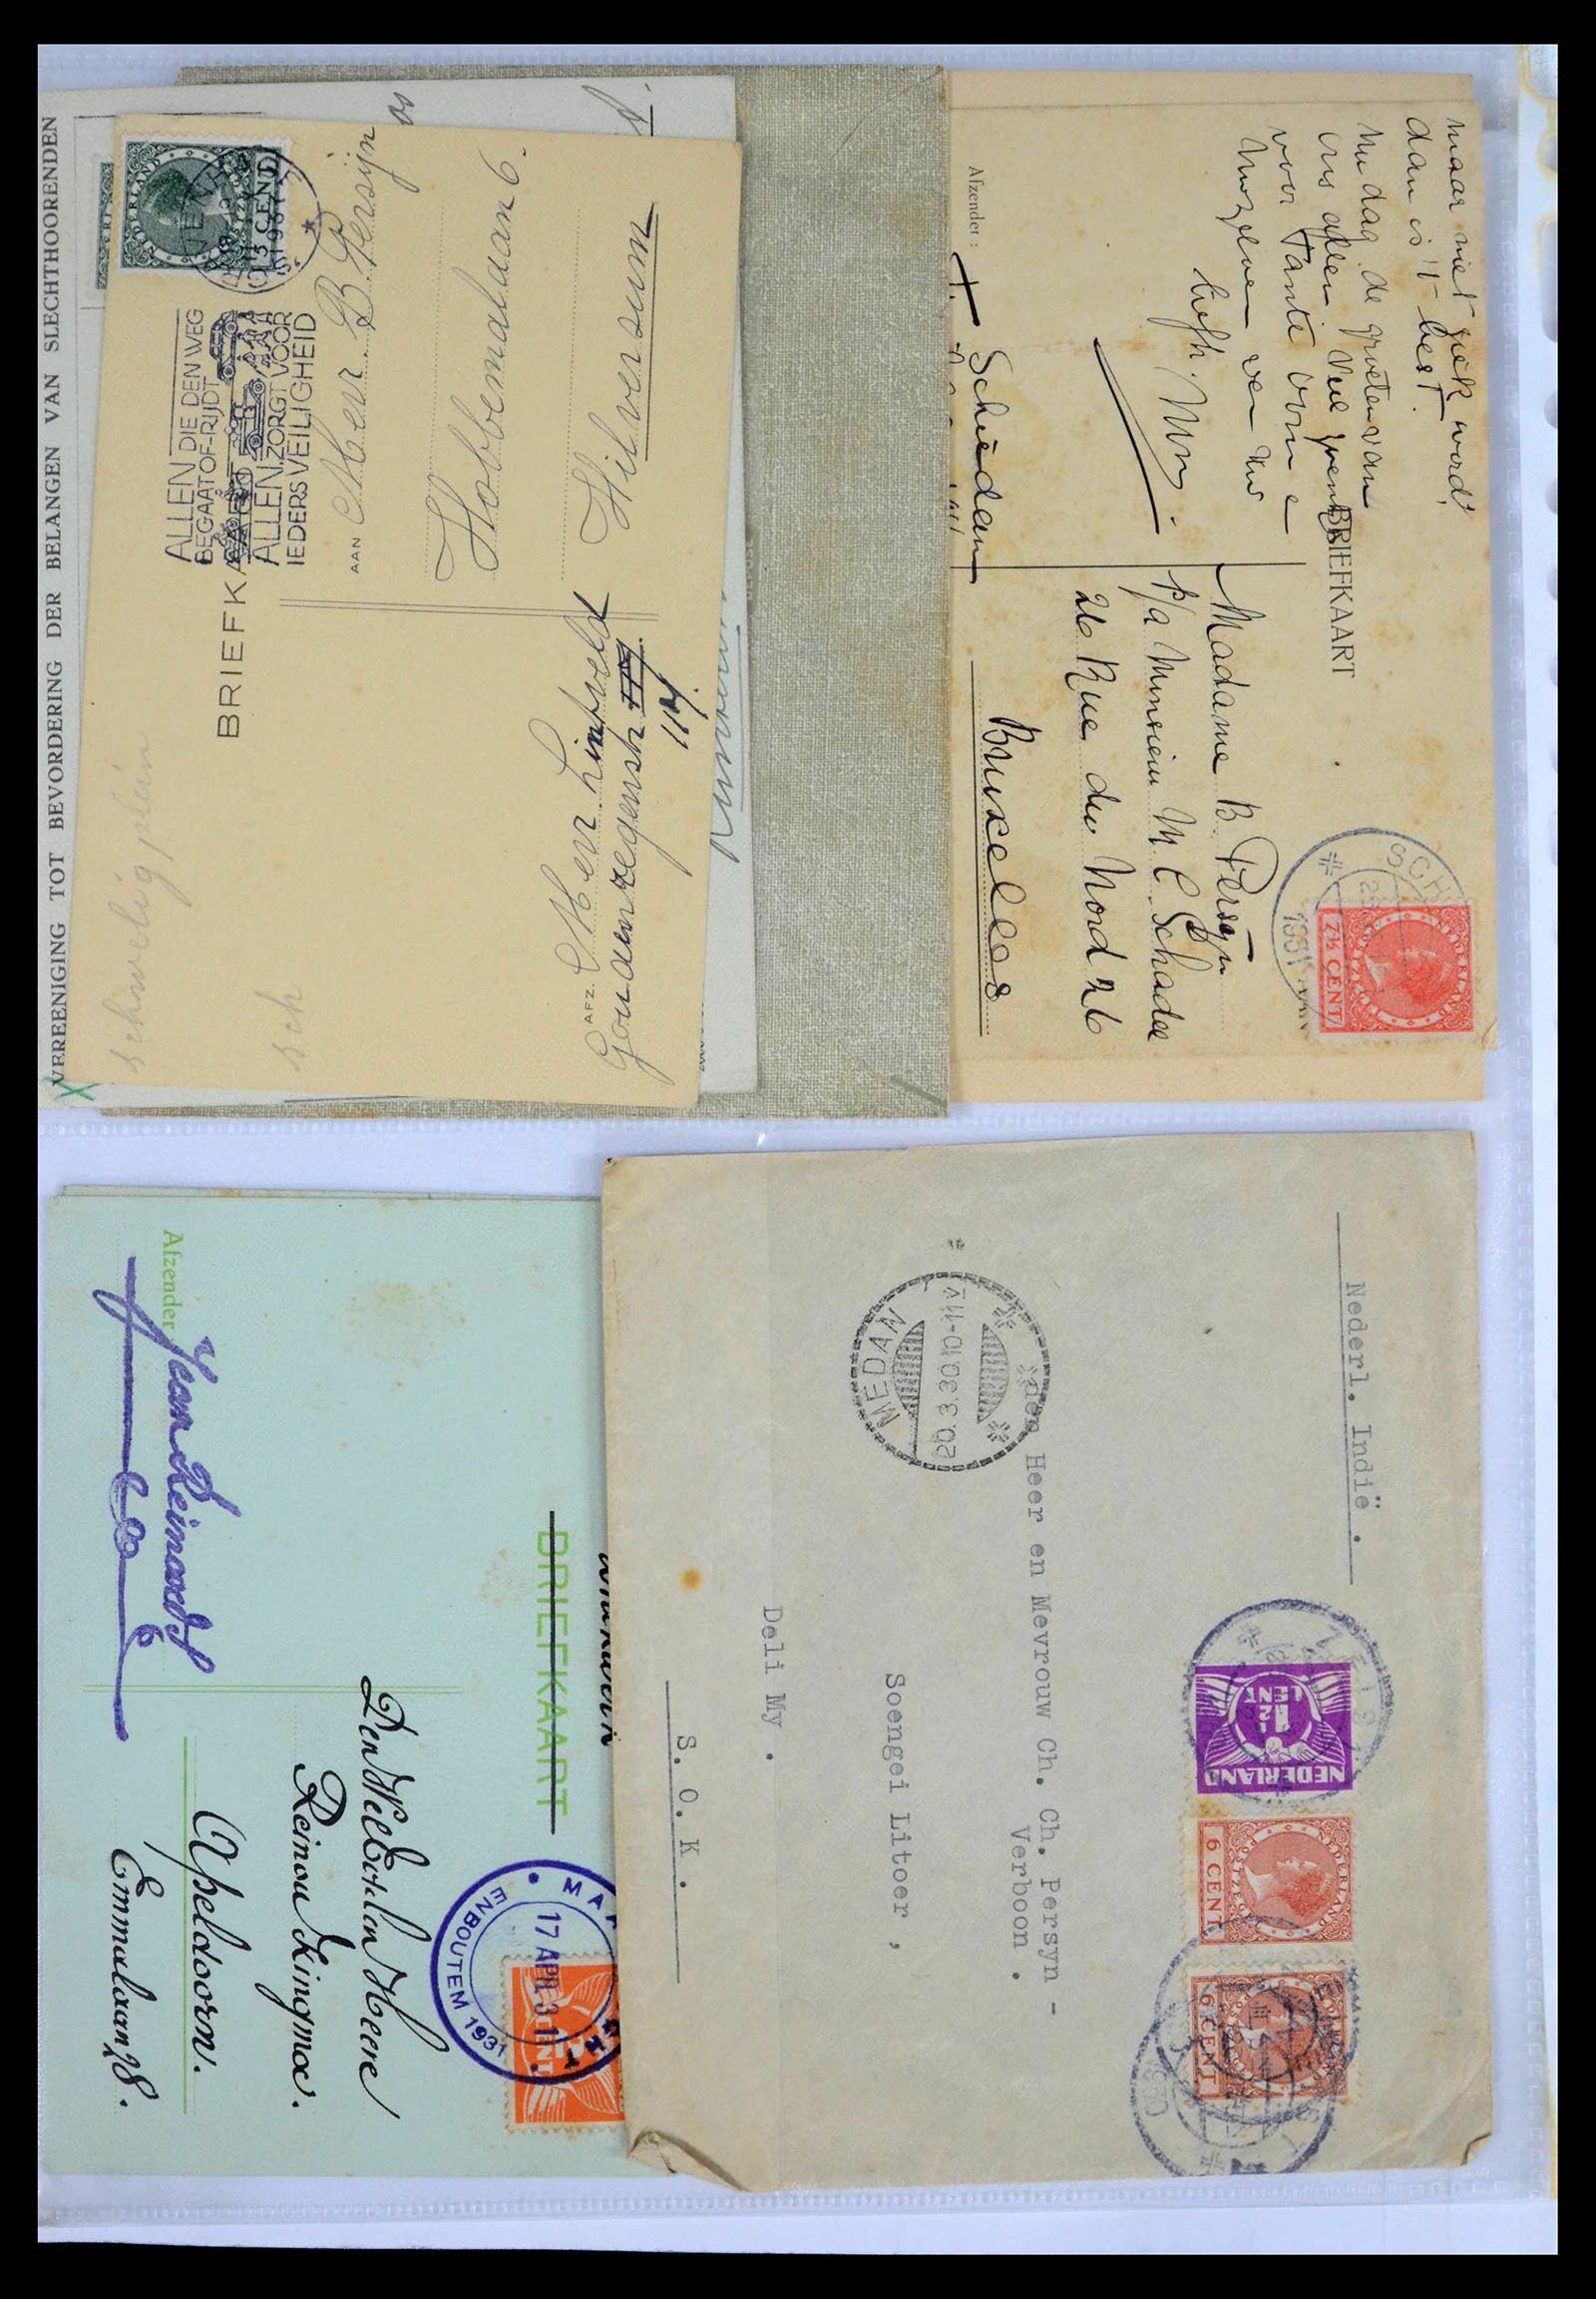 39429 0050 - Stamp collection 39429 Netherlands covers 1821-1955.